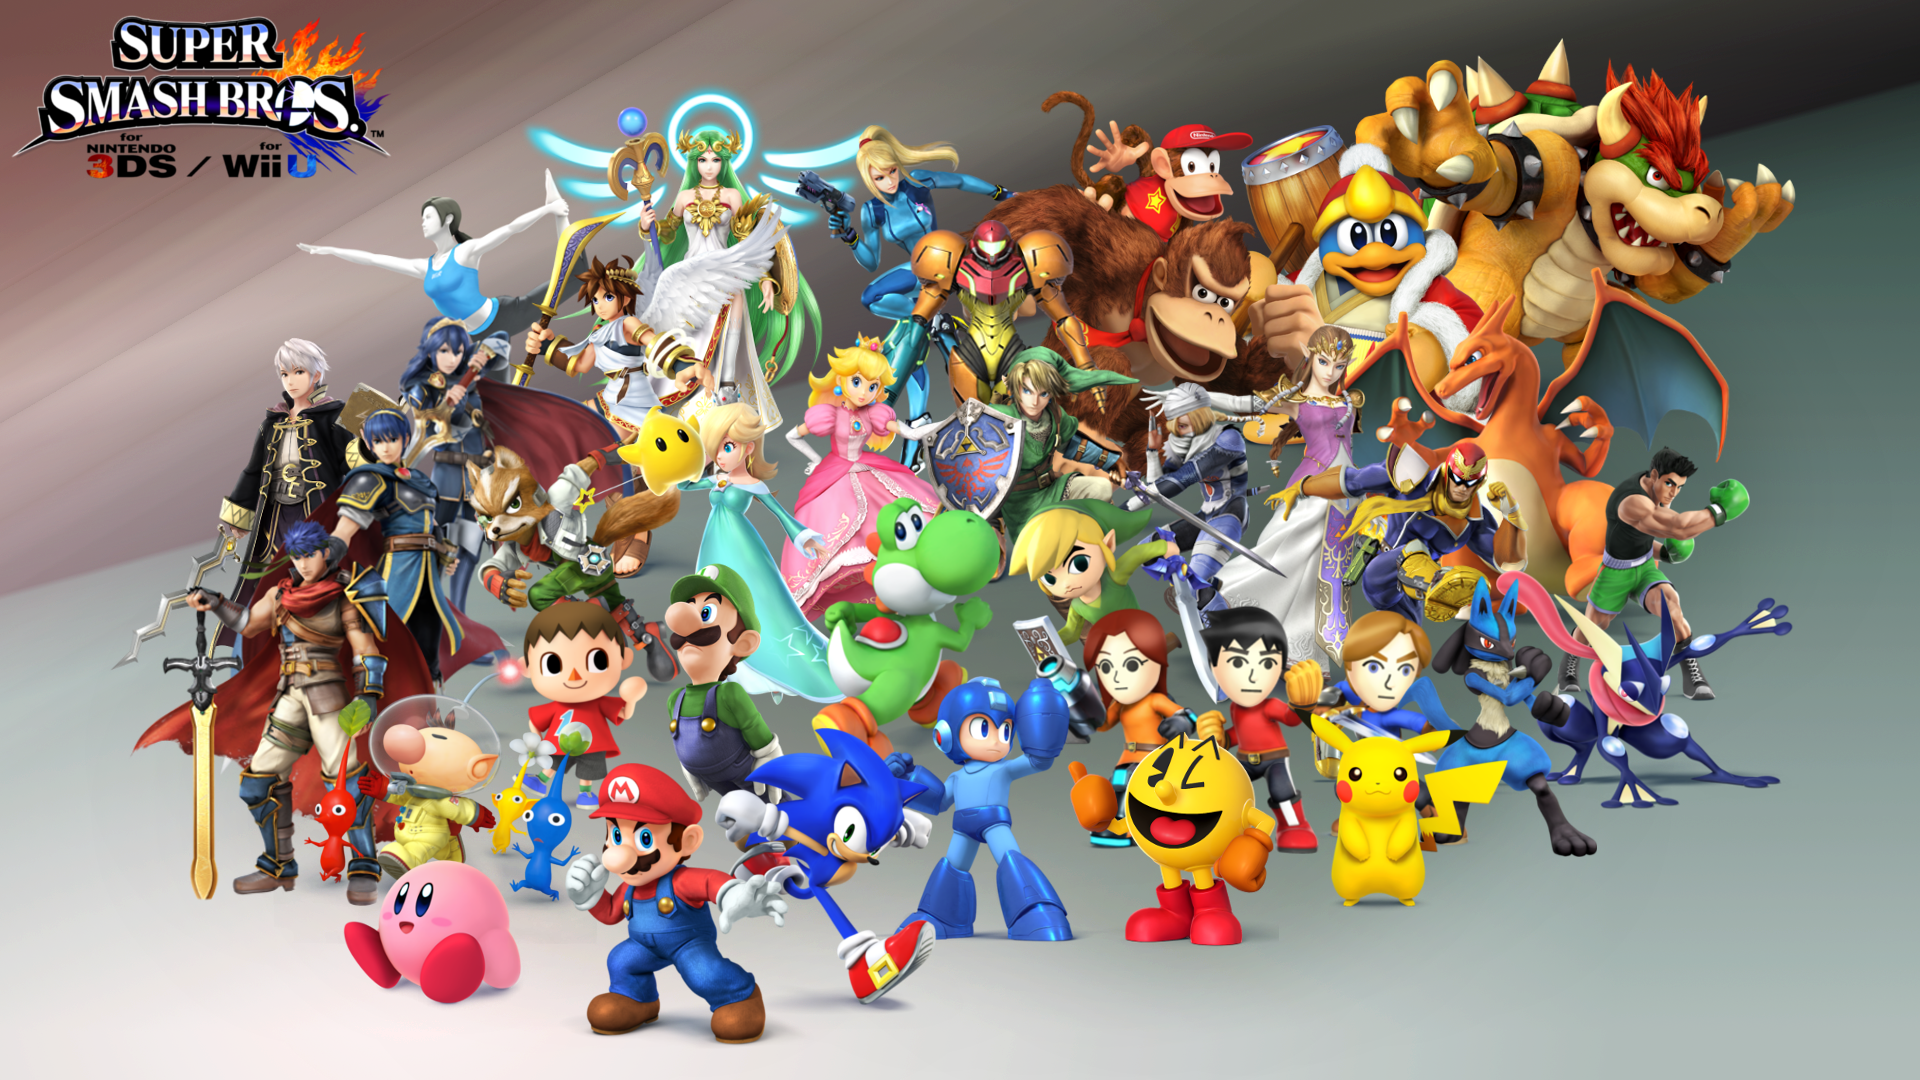 Made A X Smash Bros Wallpaper Featuring Every Character